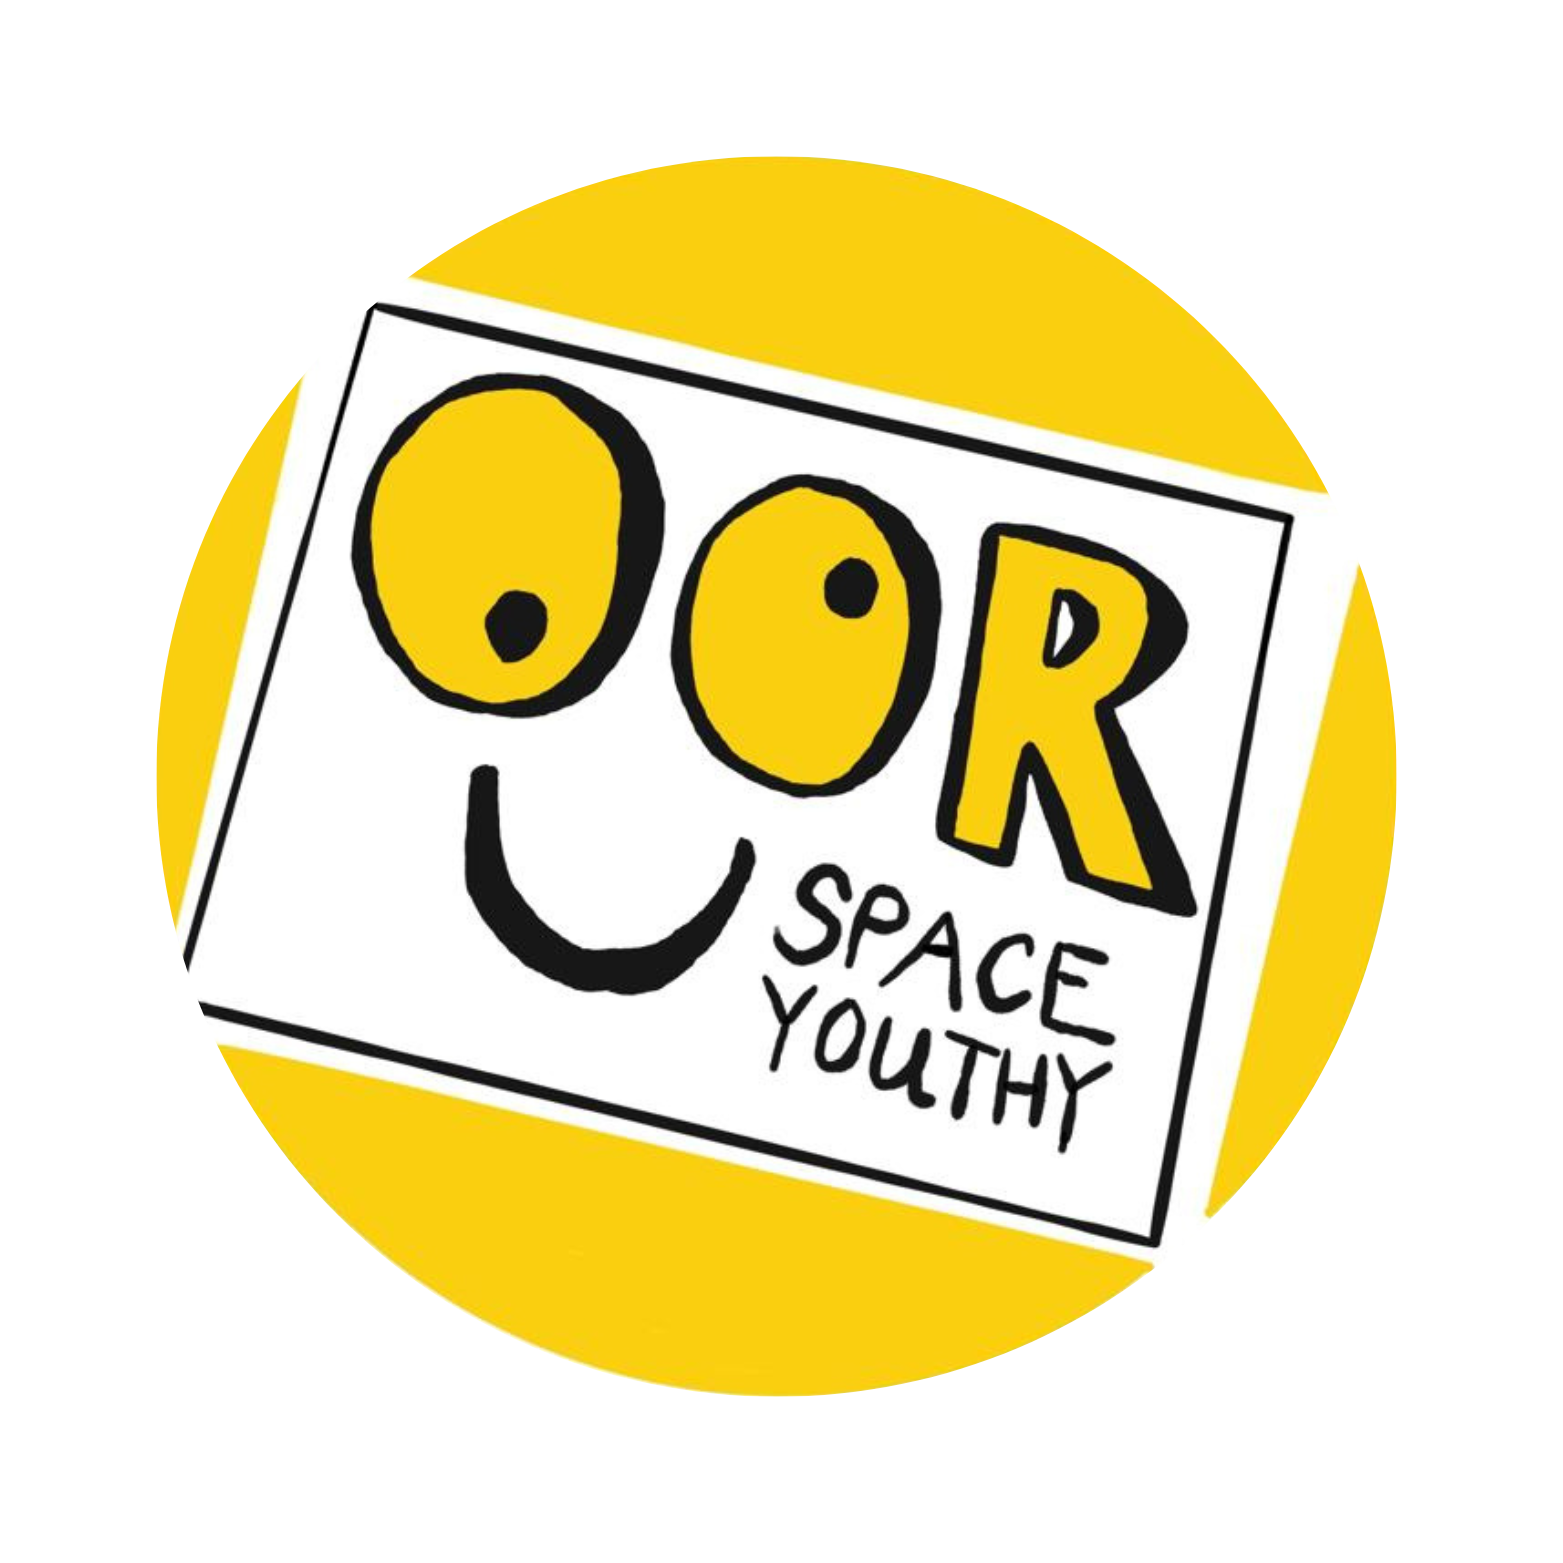 Oor Space Youthy Logo